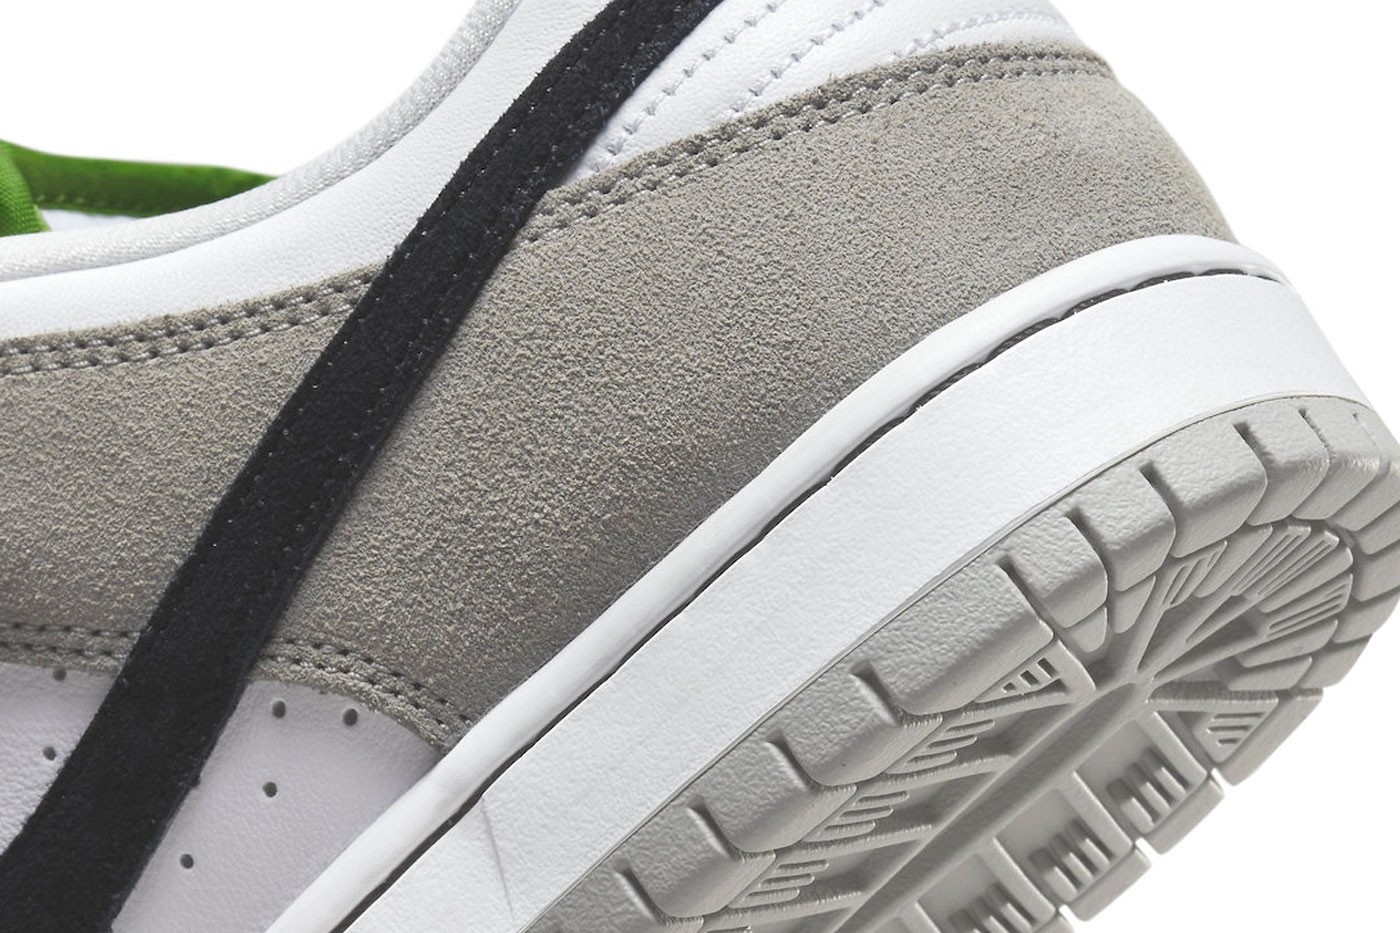 Nike SB Dunk Low To Drop In The “Chlorophyll” Colorway, FedEx 